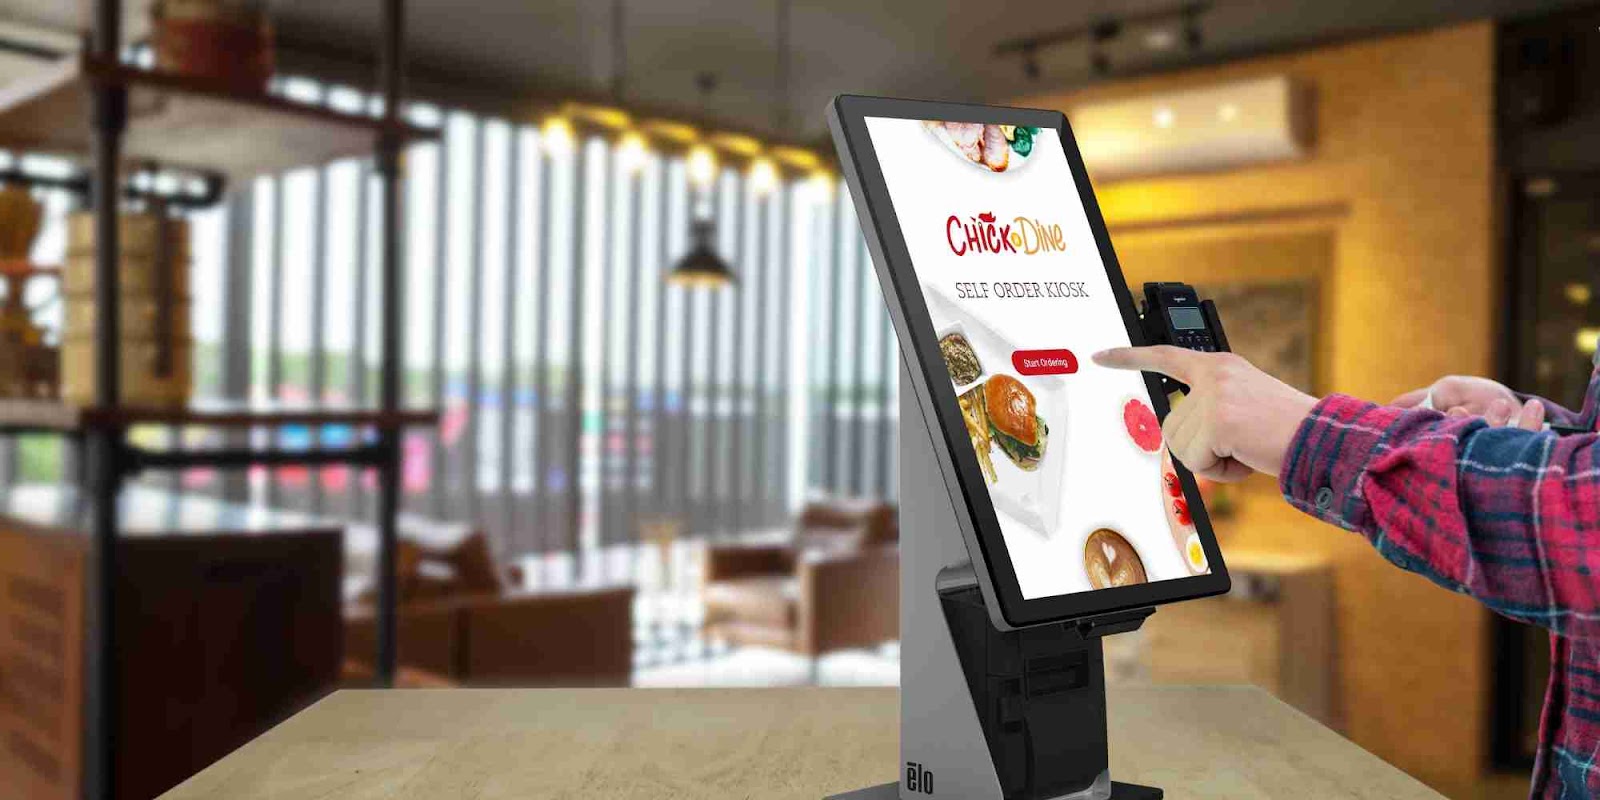 Will self-ordering kiosks Replace All Employees - Applova